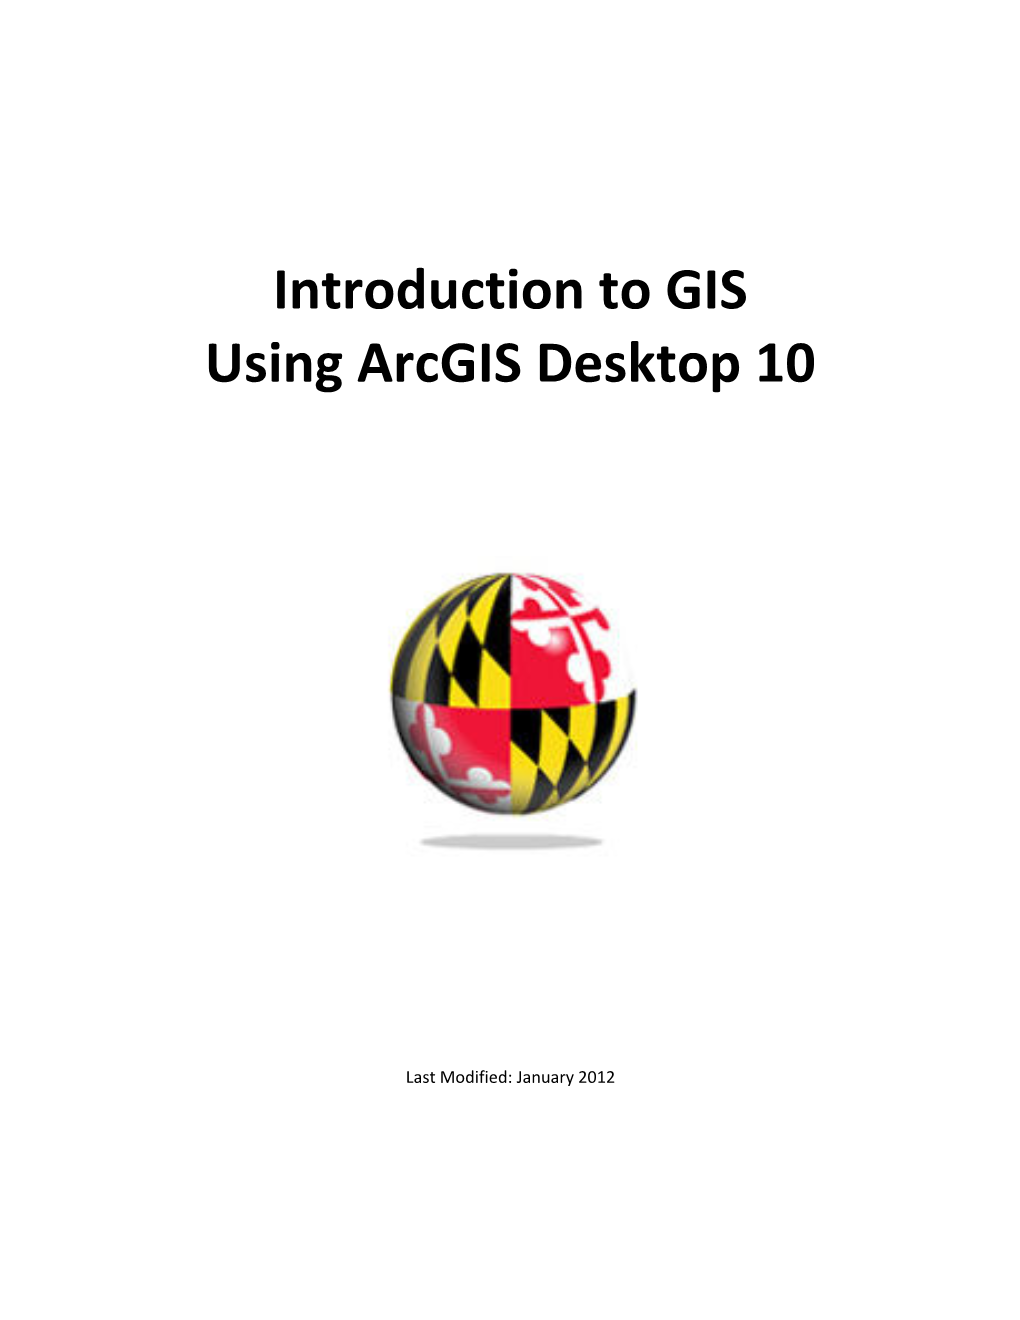 Introduction to GIS Using Arcgis Desktop 10